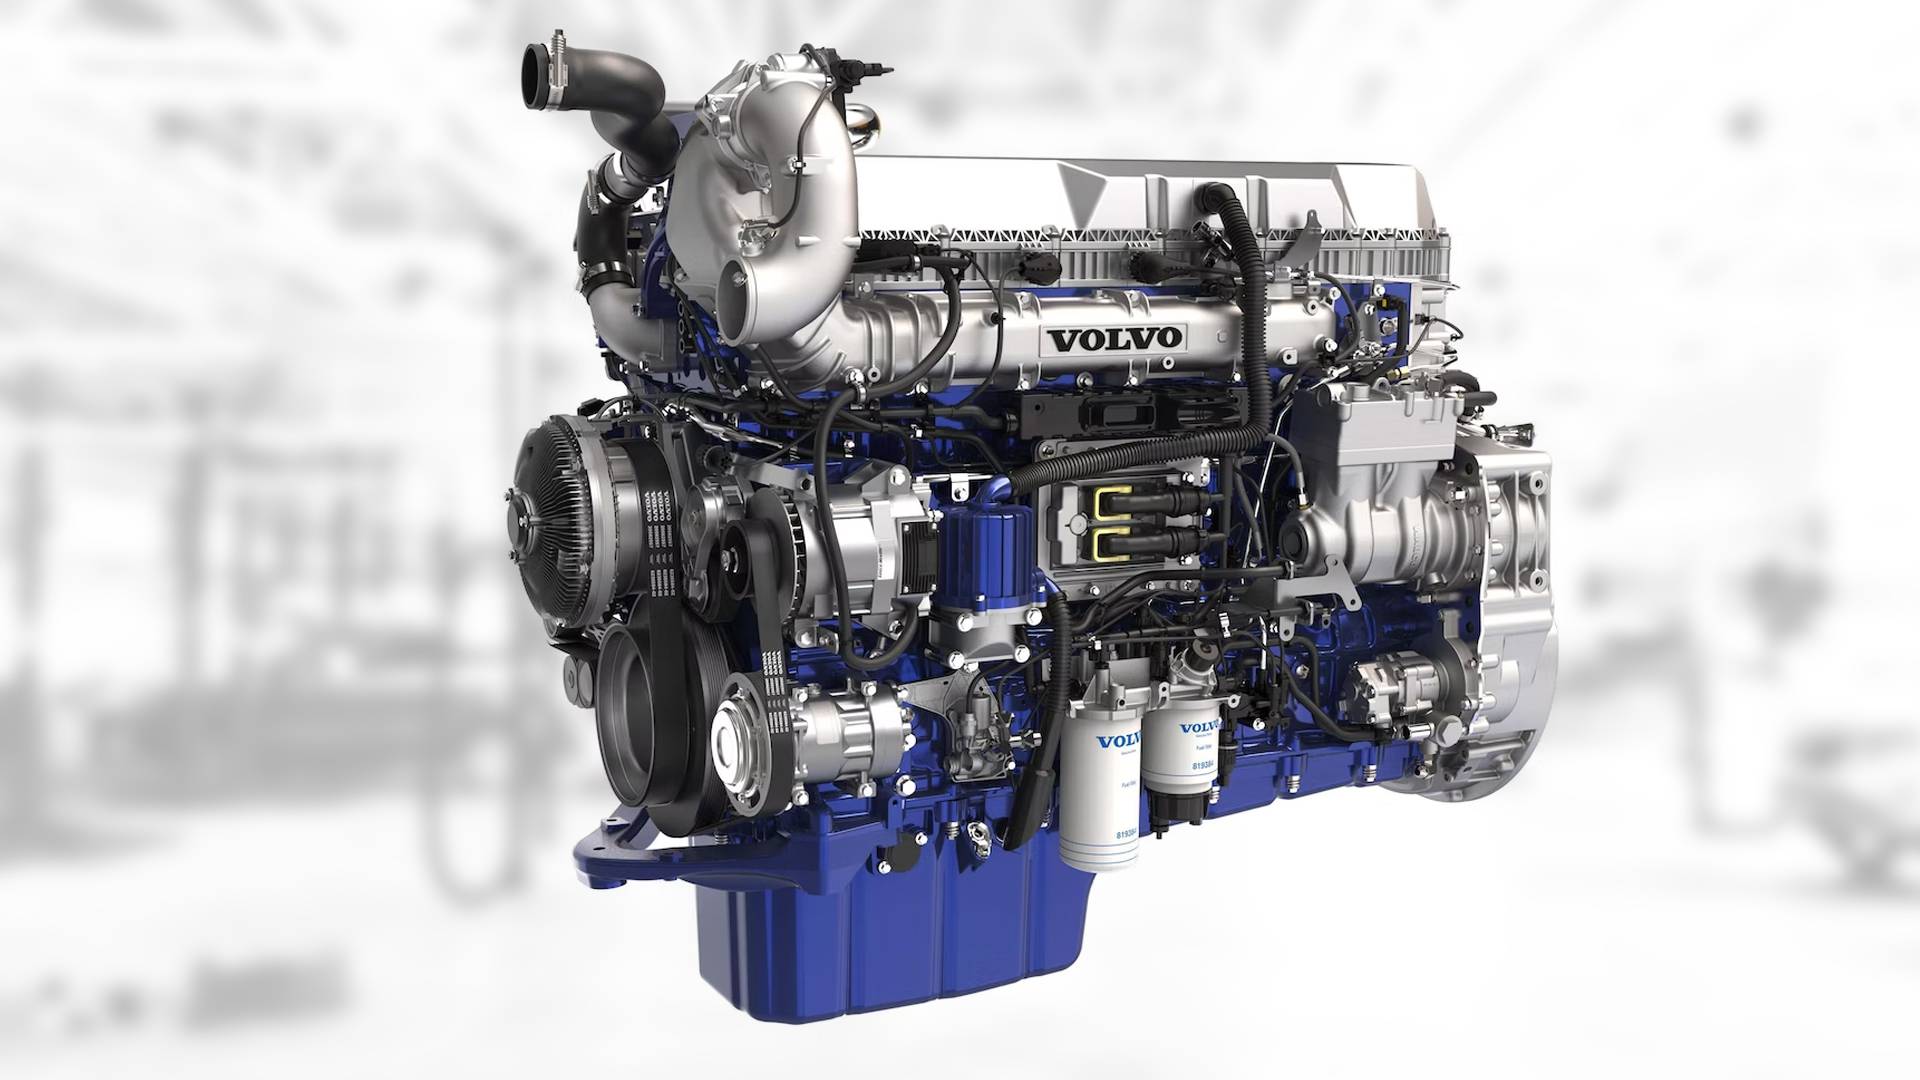 Volvo’s New Line of Diesel Engine Parts for Heavy Equipment Promises Increased Efficiency and Durability